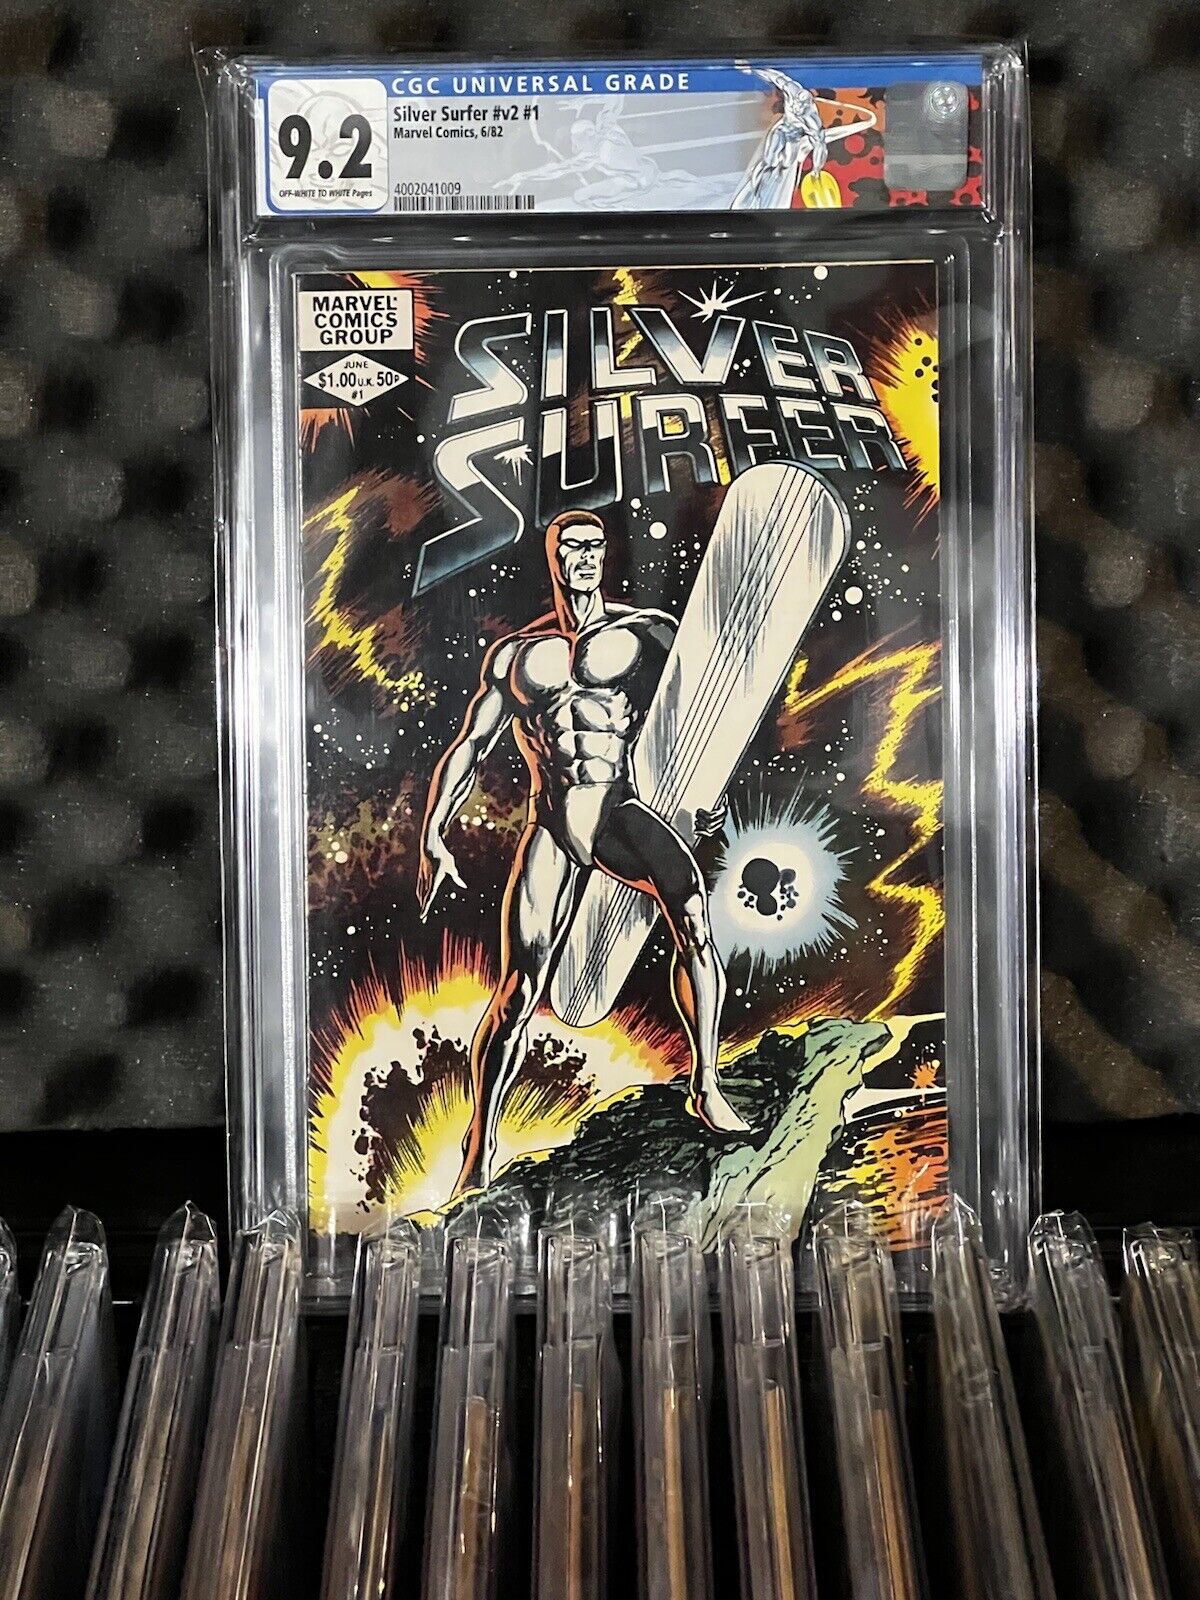 SILVER SURFER v2 ONE-SHOT #1 GALACTUS CGC 9.2 CUSTOM LABEL WHITE PAGES BYRNE